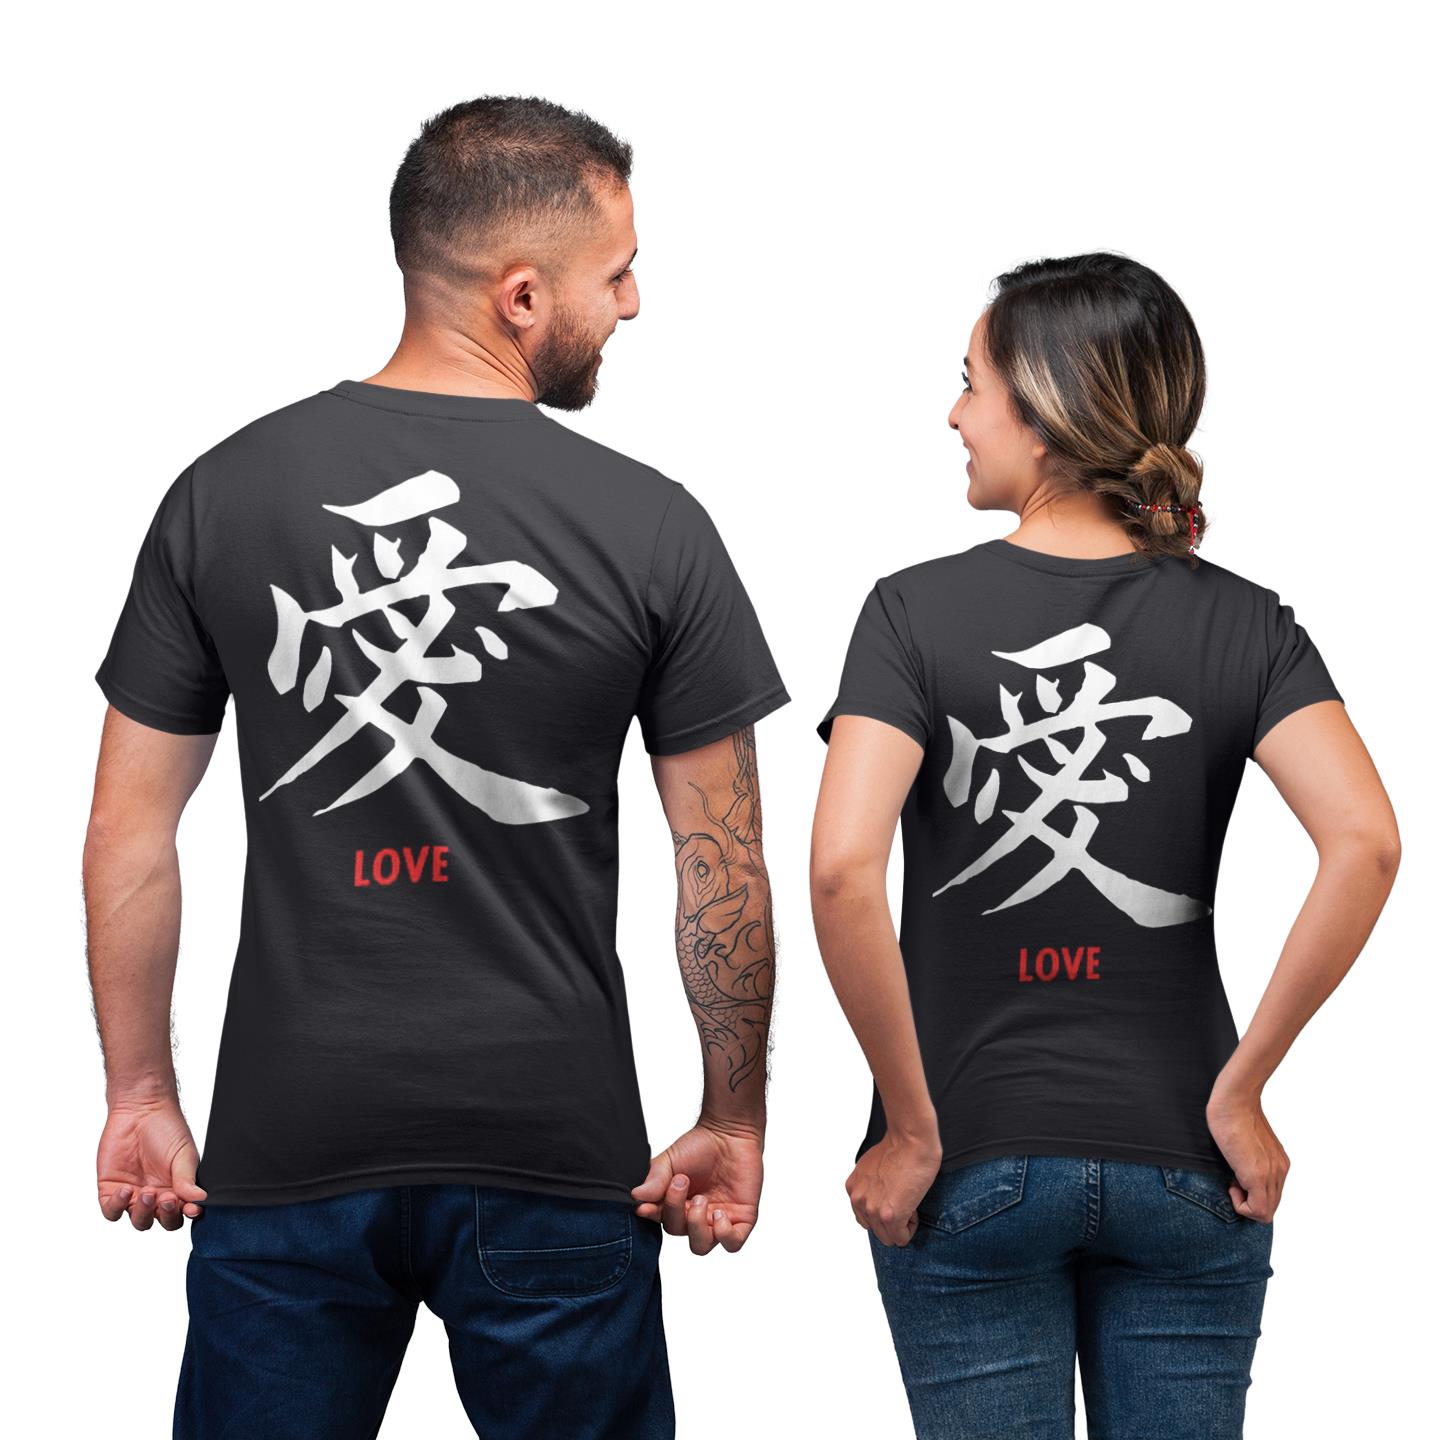 Love In Japanese Meaning Of Love Shirt For Couples Lover Matching T-shirt